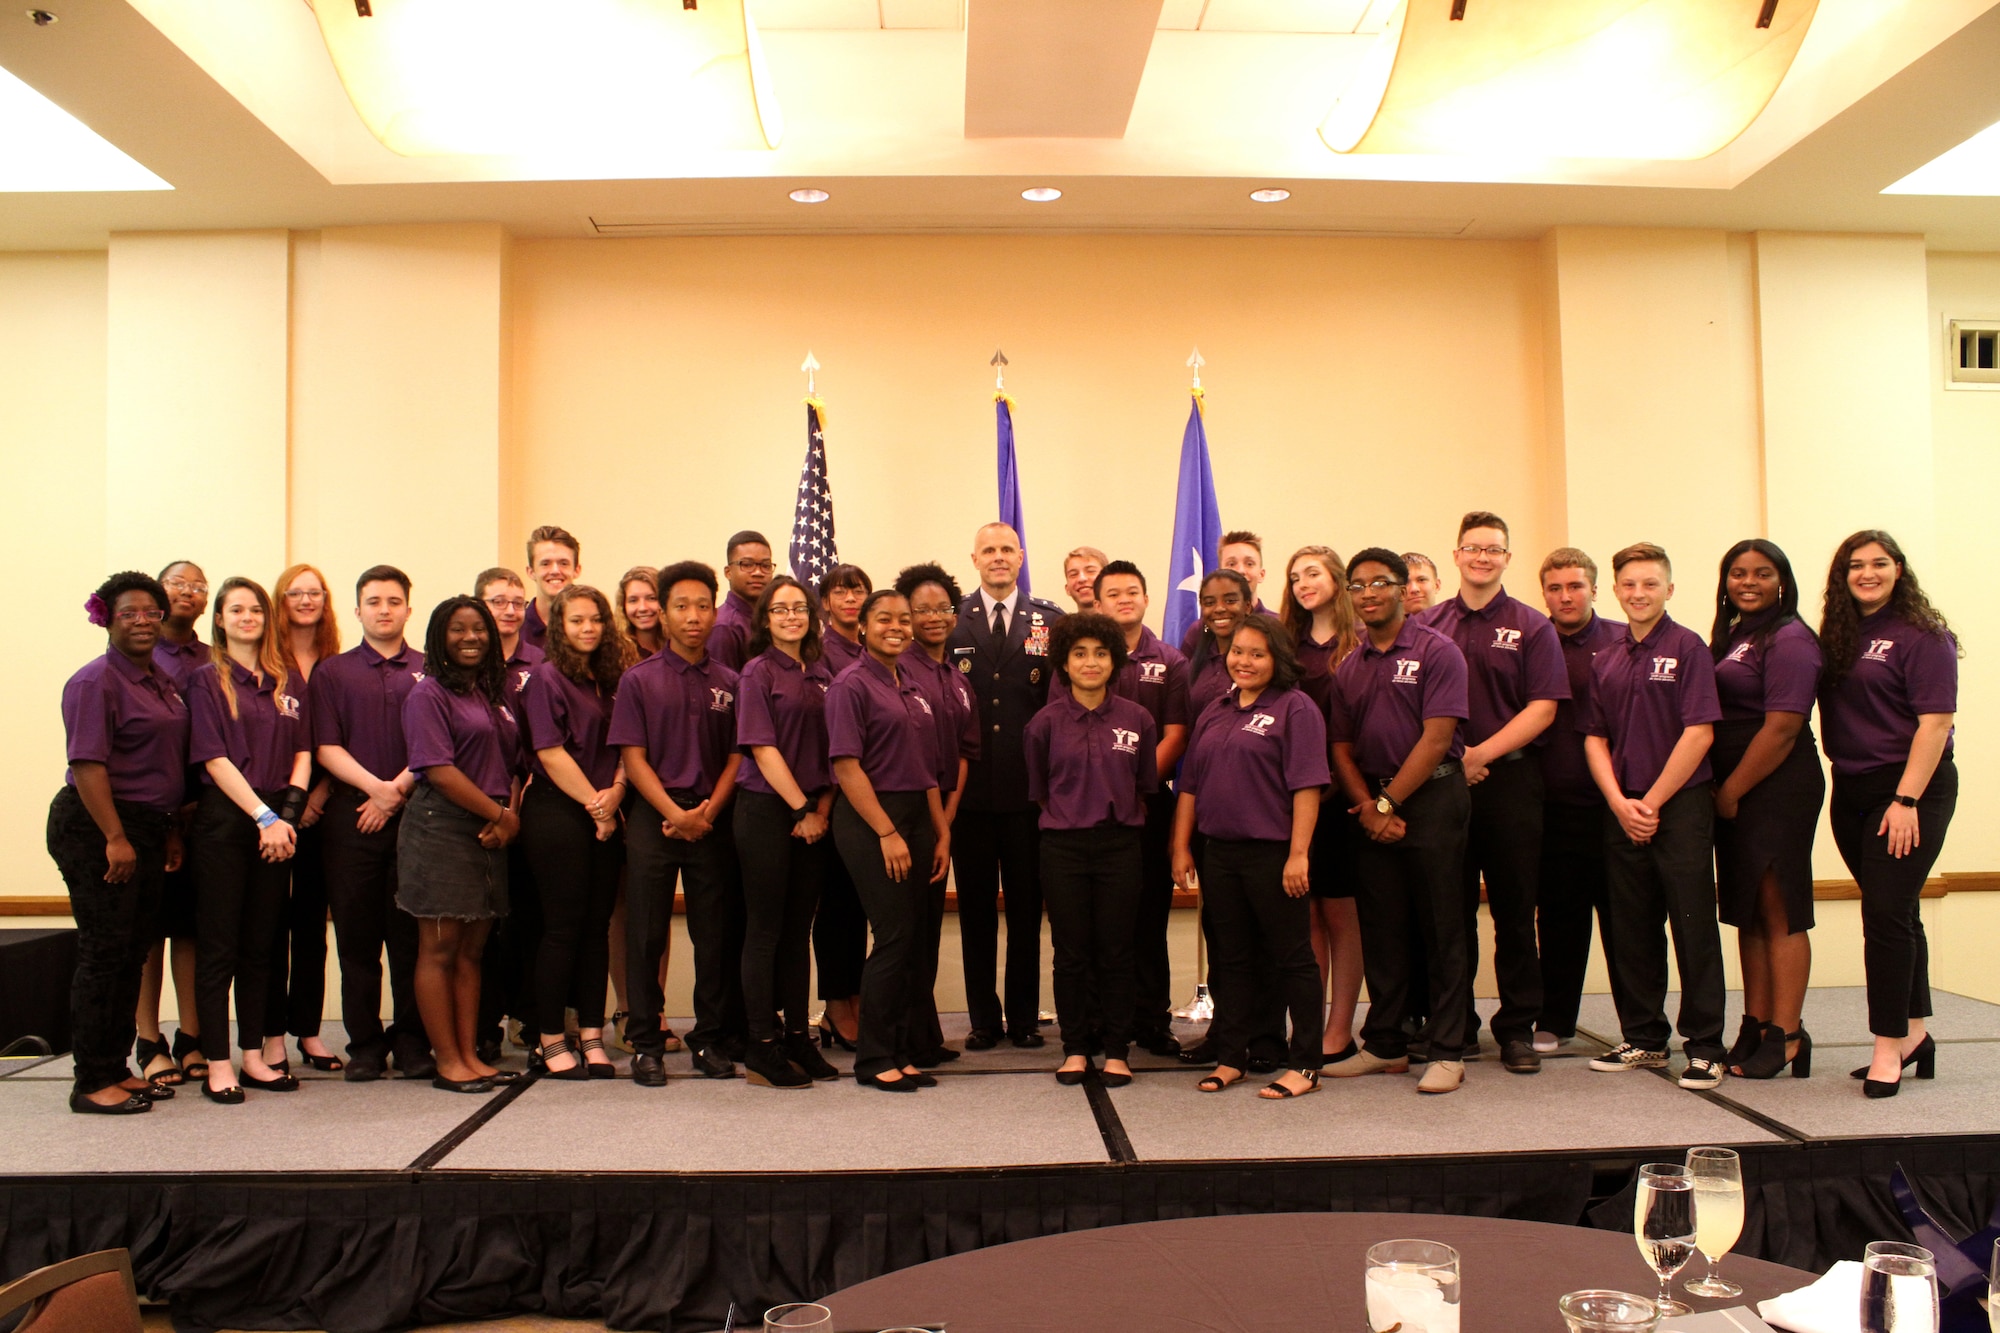 At center, Maj. Gen. Brad Spacy, Air Force Installation and Mission Support Center commander, poses for a photo with installation and, in some cases, state military youth of the year winners during an awards ceremony at the conclusion of the 2019 Military Youth of the Year Summit in San Antonio, June 17-21. (U.S. Air Force photo by Debbie Aragon)